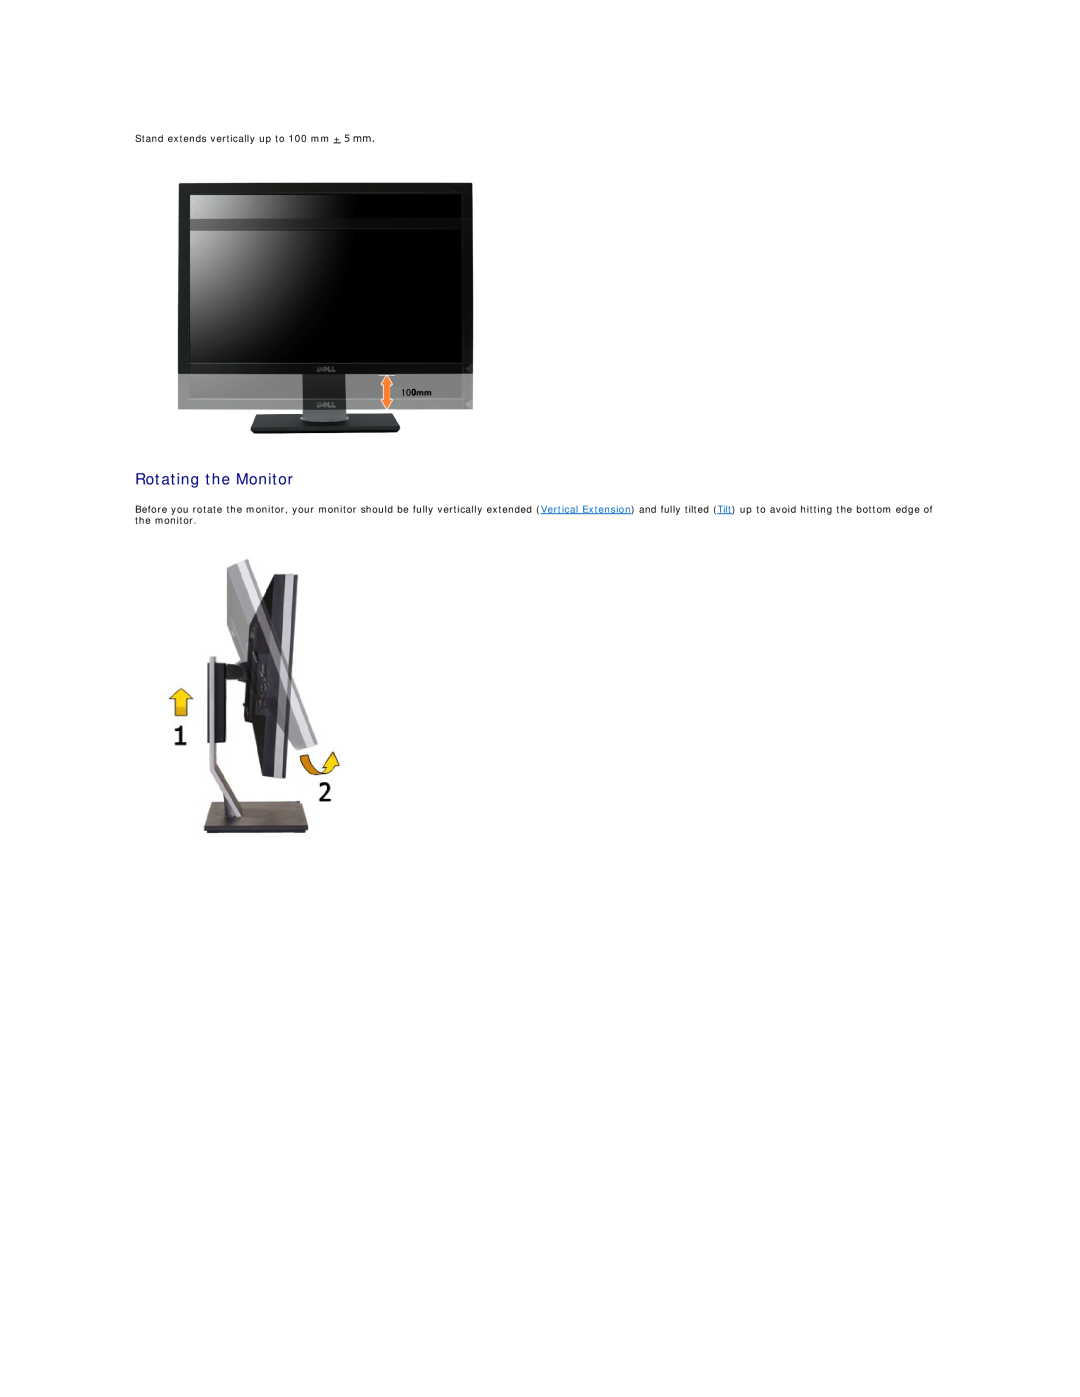 Dell 320-8277, U2410 manual Rotating the Monitor, Stand extends vertically up to 100 mm + 5 mm 